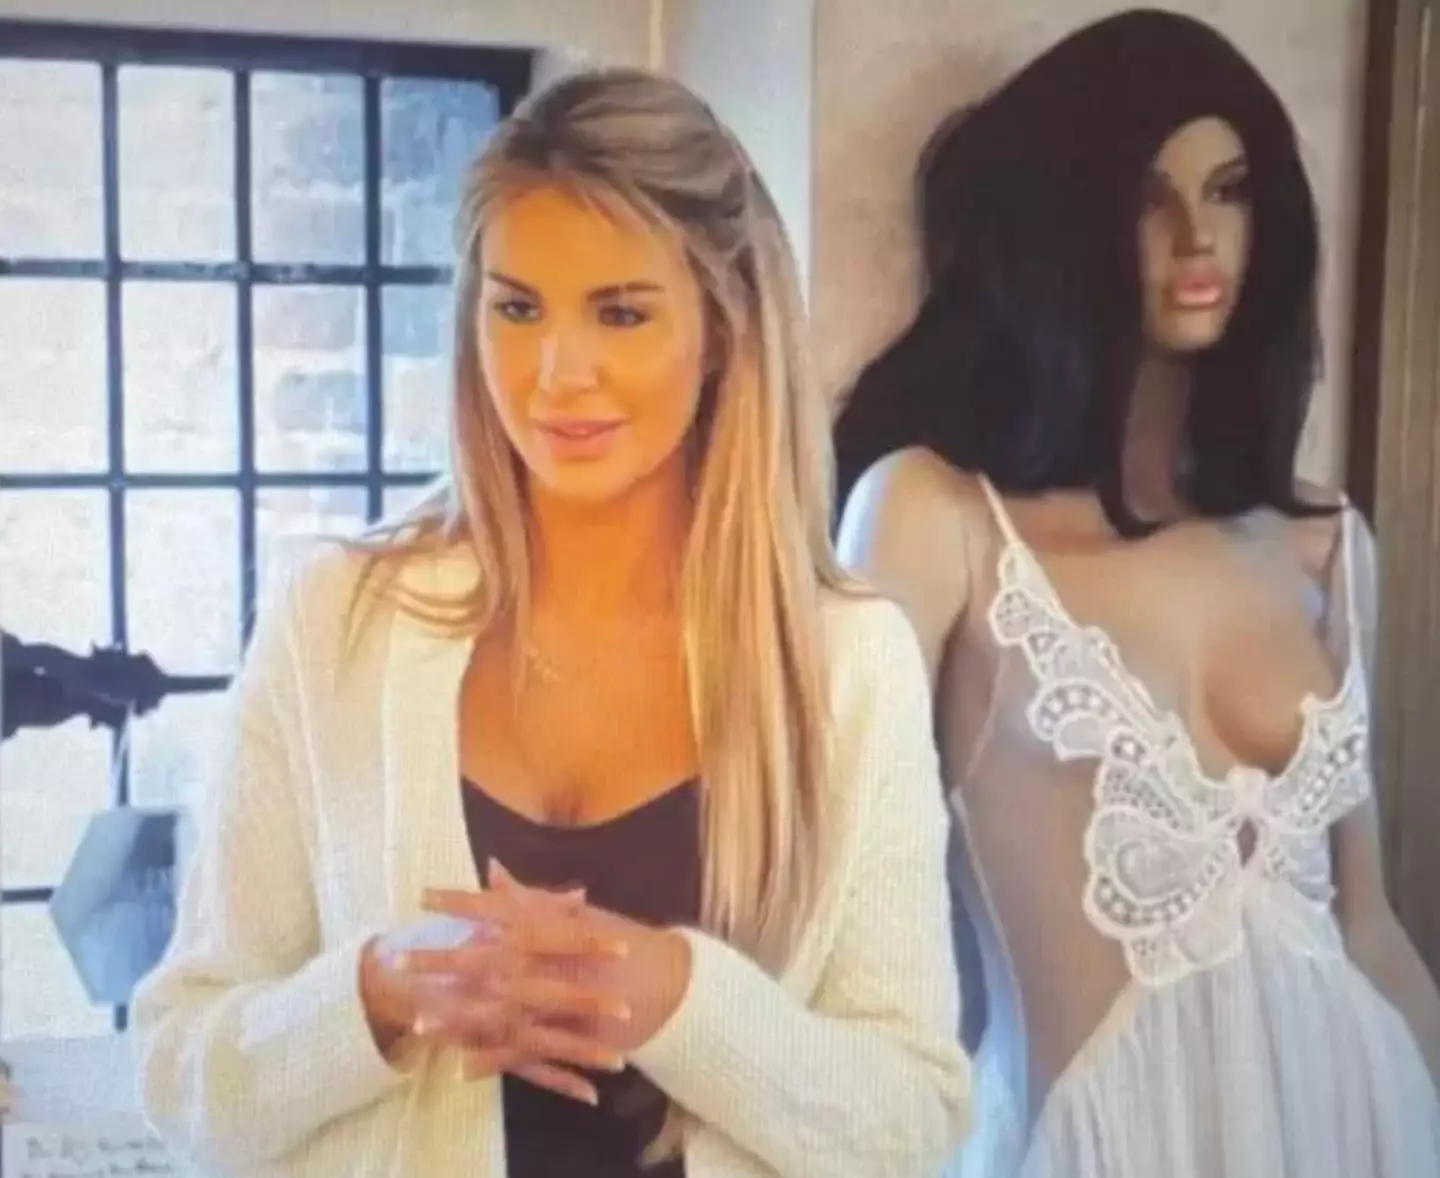 The 'creepy' mannequin in question. Credit Channel 4